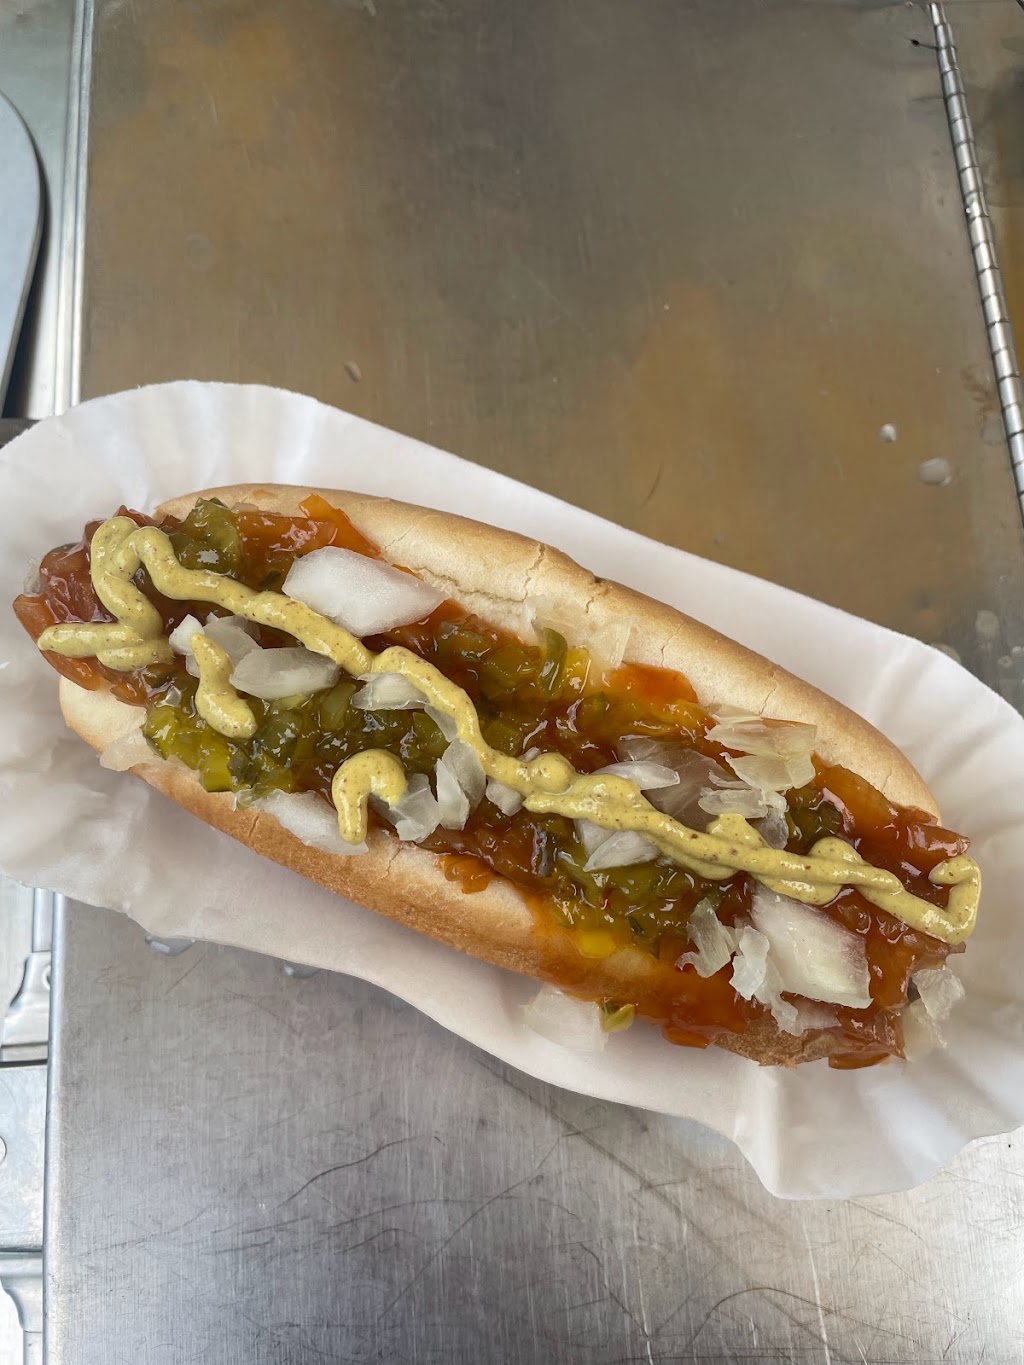 Ron Weller & Sons /Weller’s dogs and burgers | 770 State Rte 55, Highland, NY 12528 | Phone: (845) 518-6676